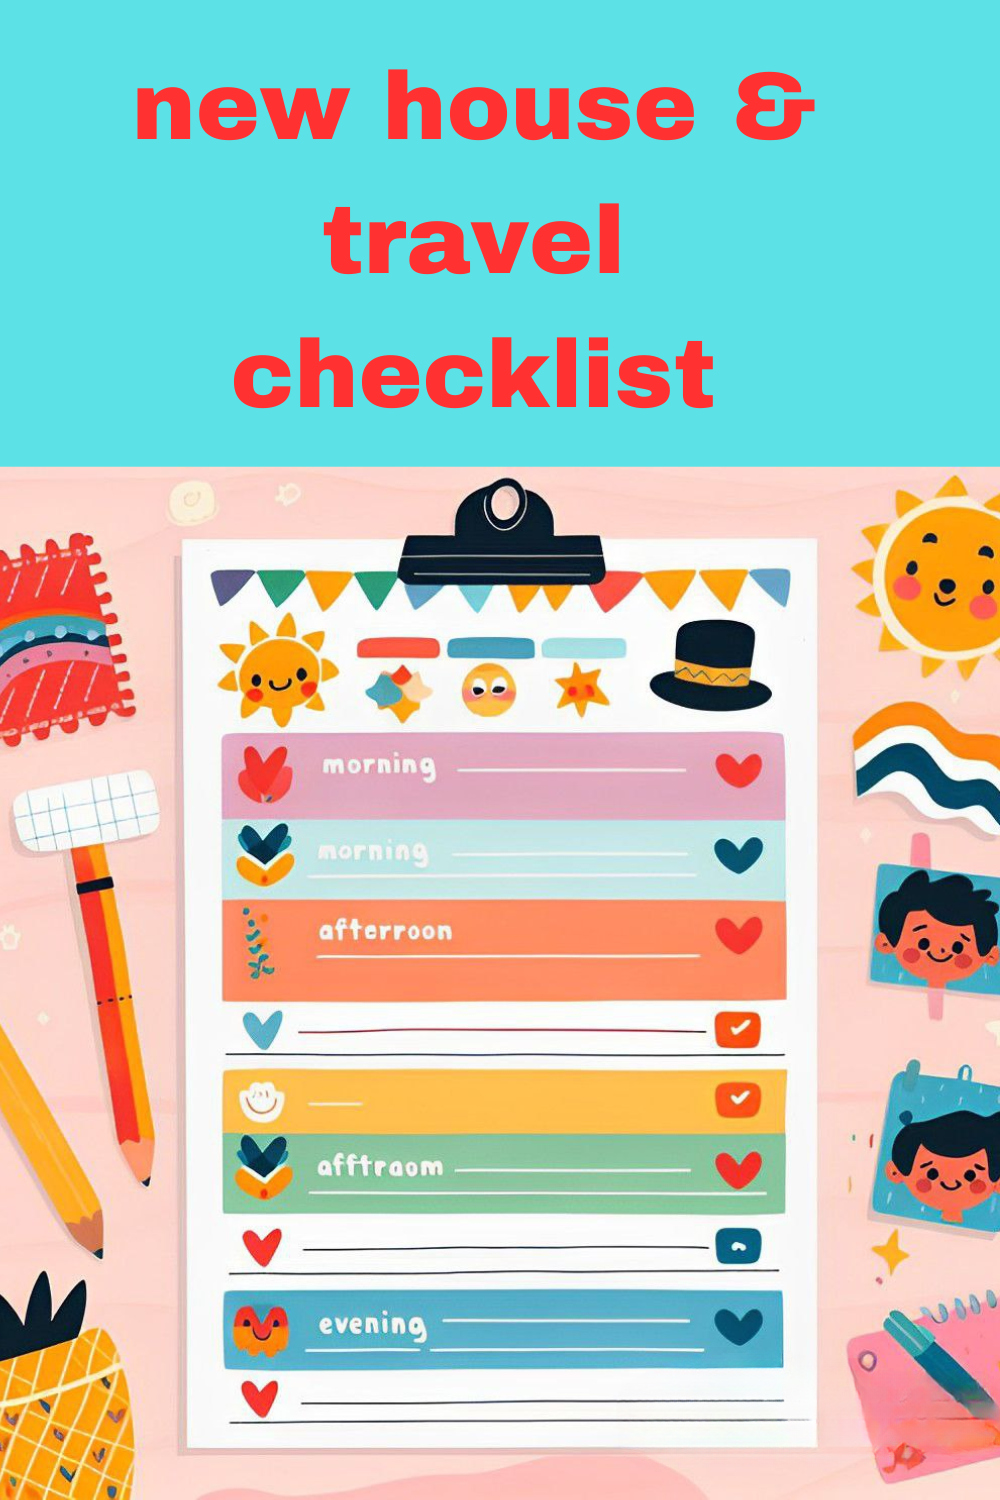 new house & travel checklist pinterest preview image.